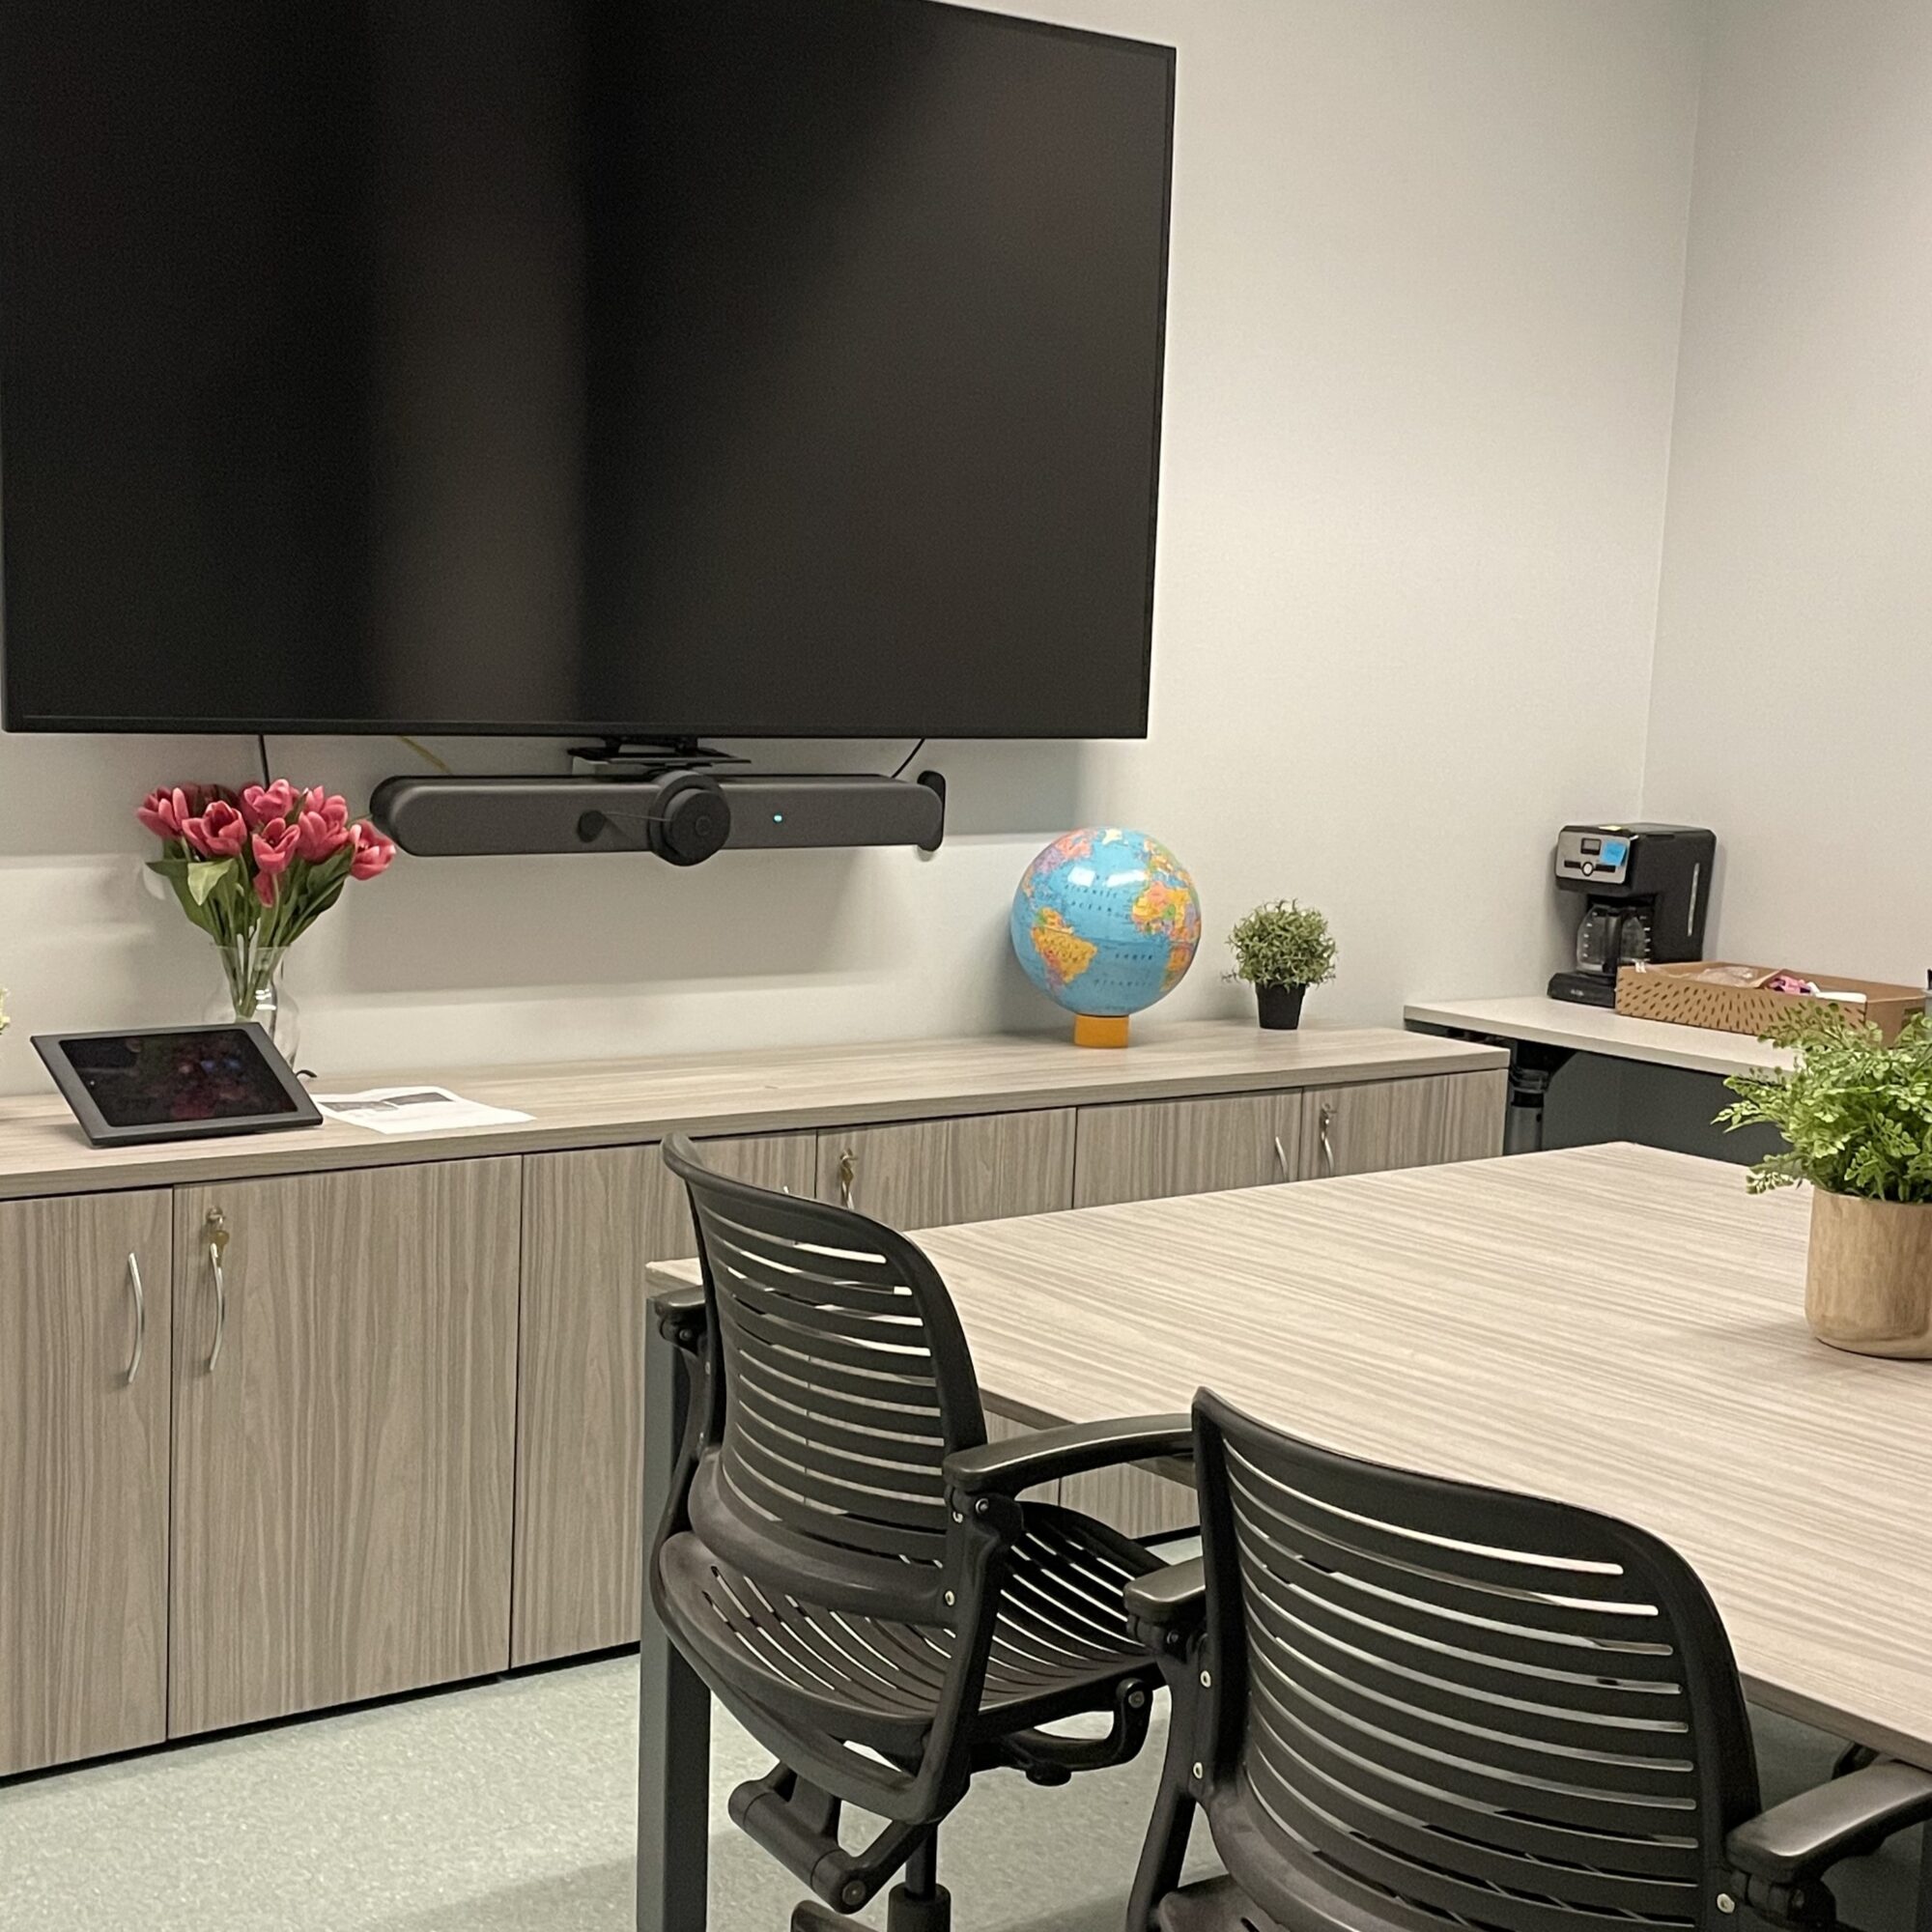 Employee break room with office chairs, flowers, coffee maker and large screen for Zoom meetings